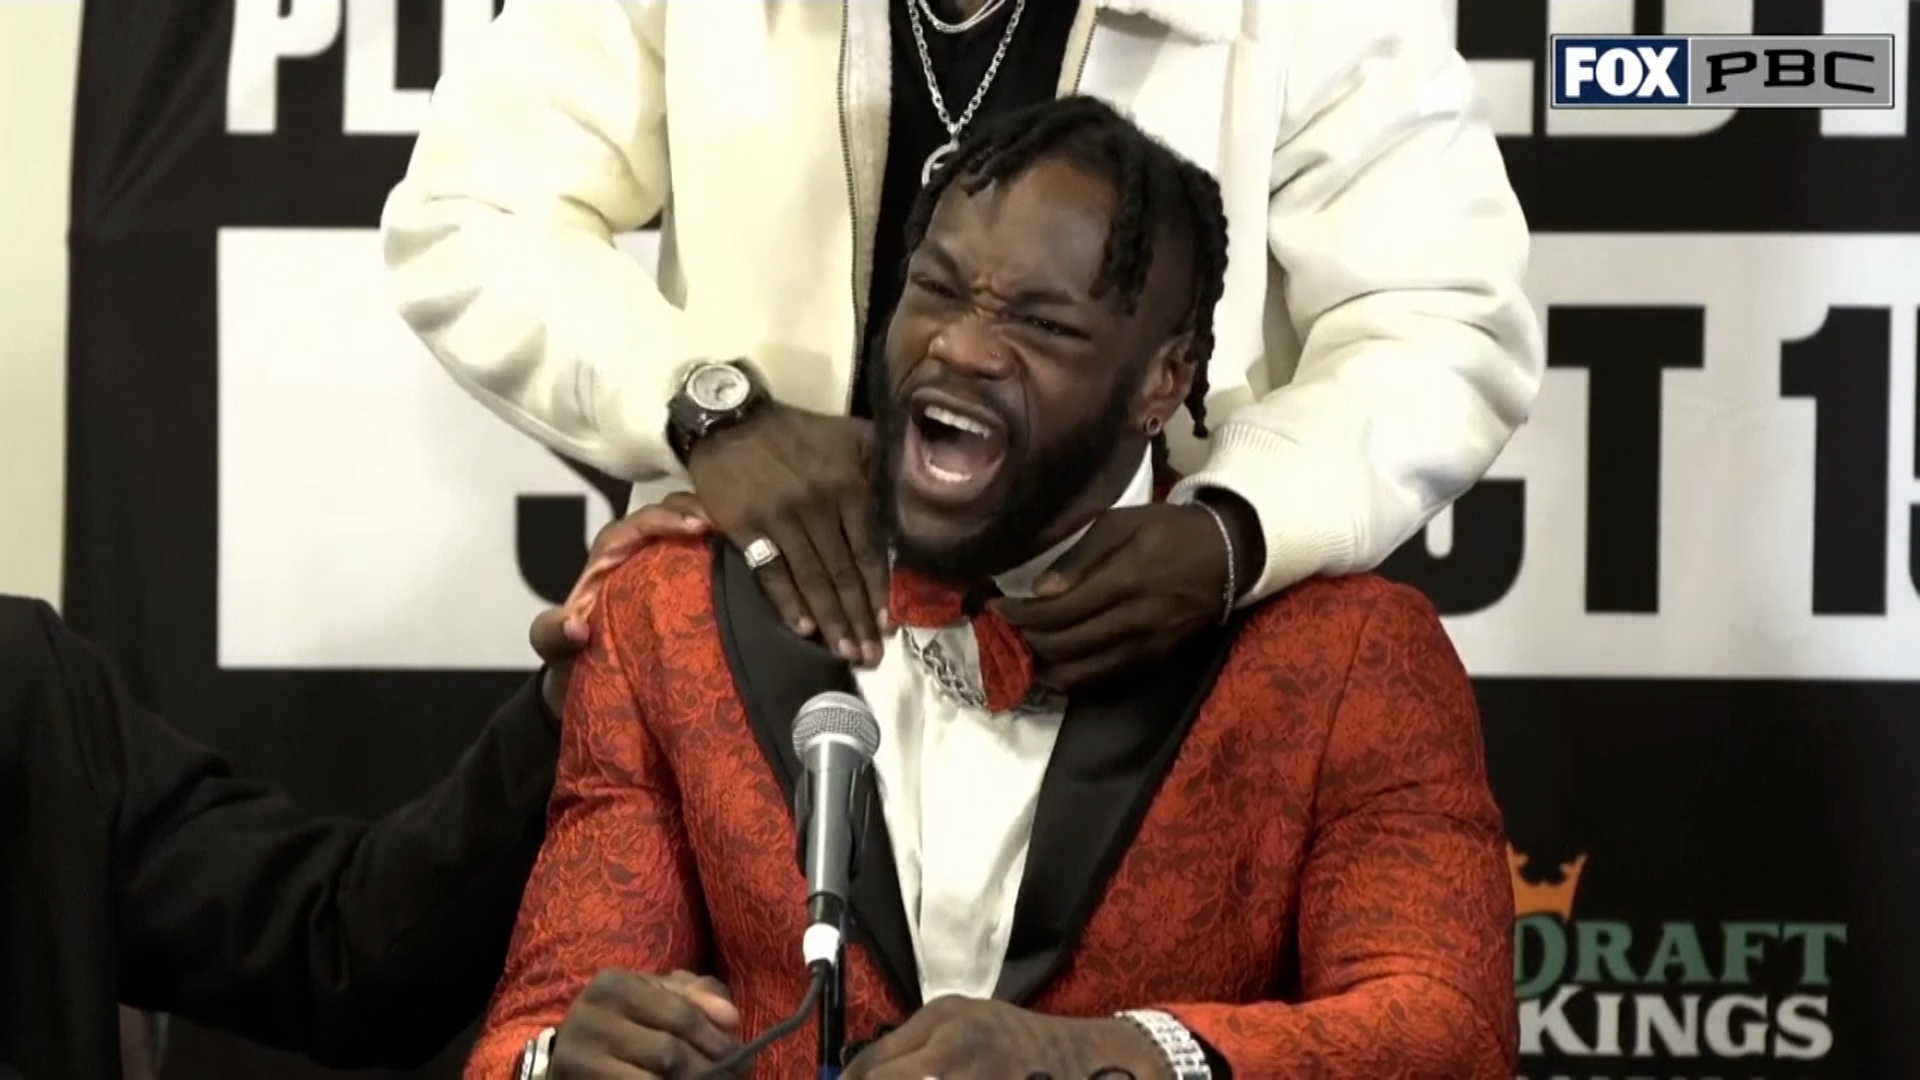 Deontay Wilder bursts into tears discussing the dangers of boxing